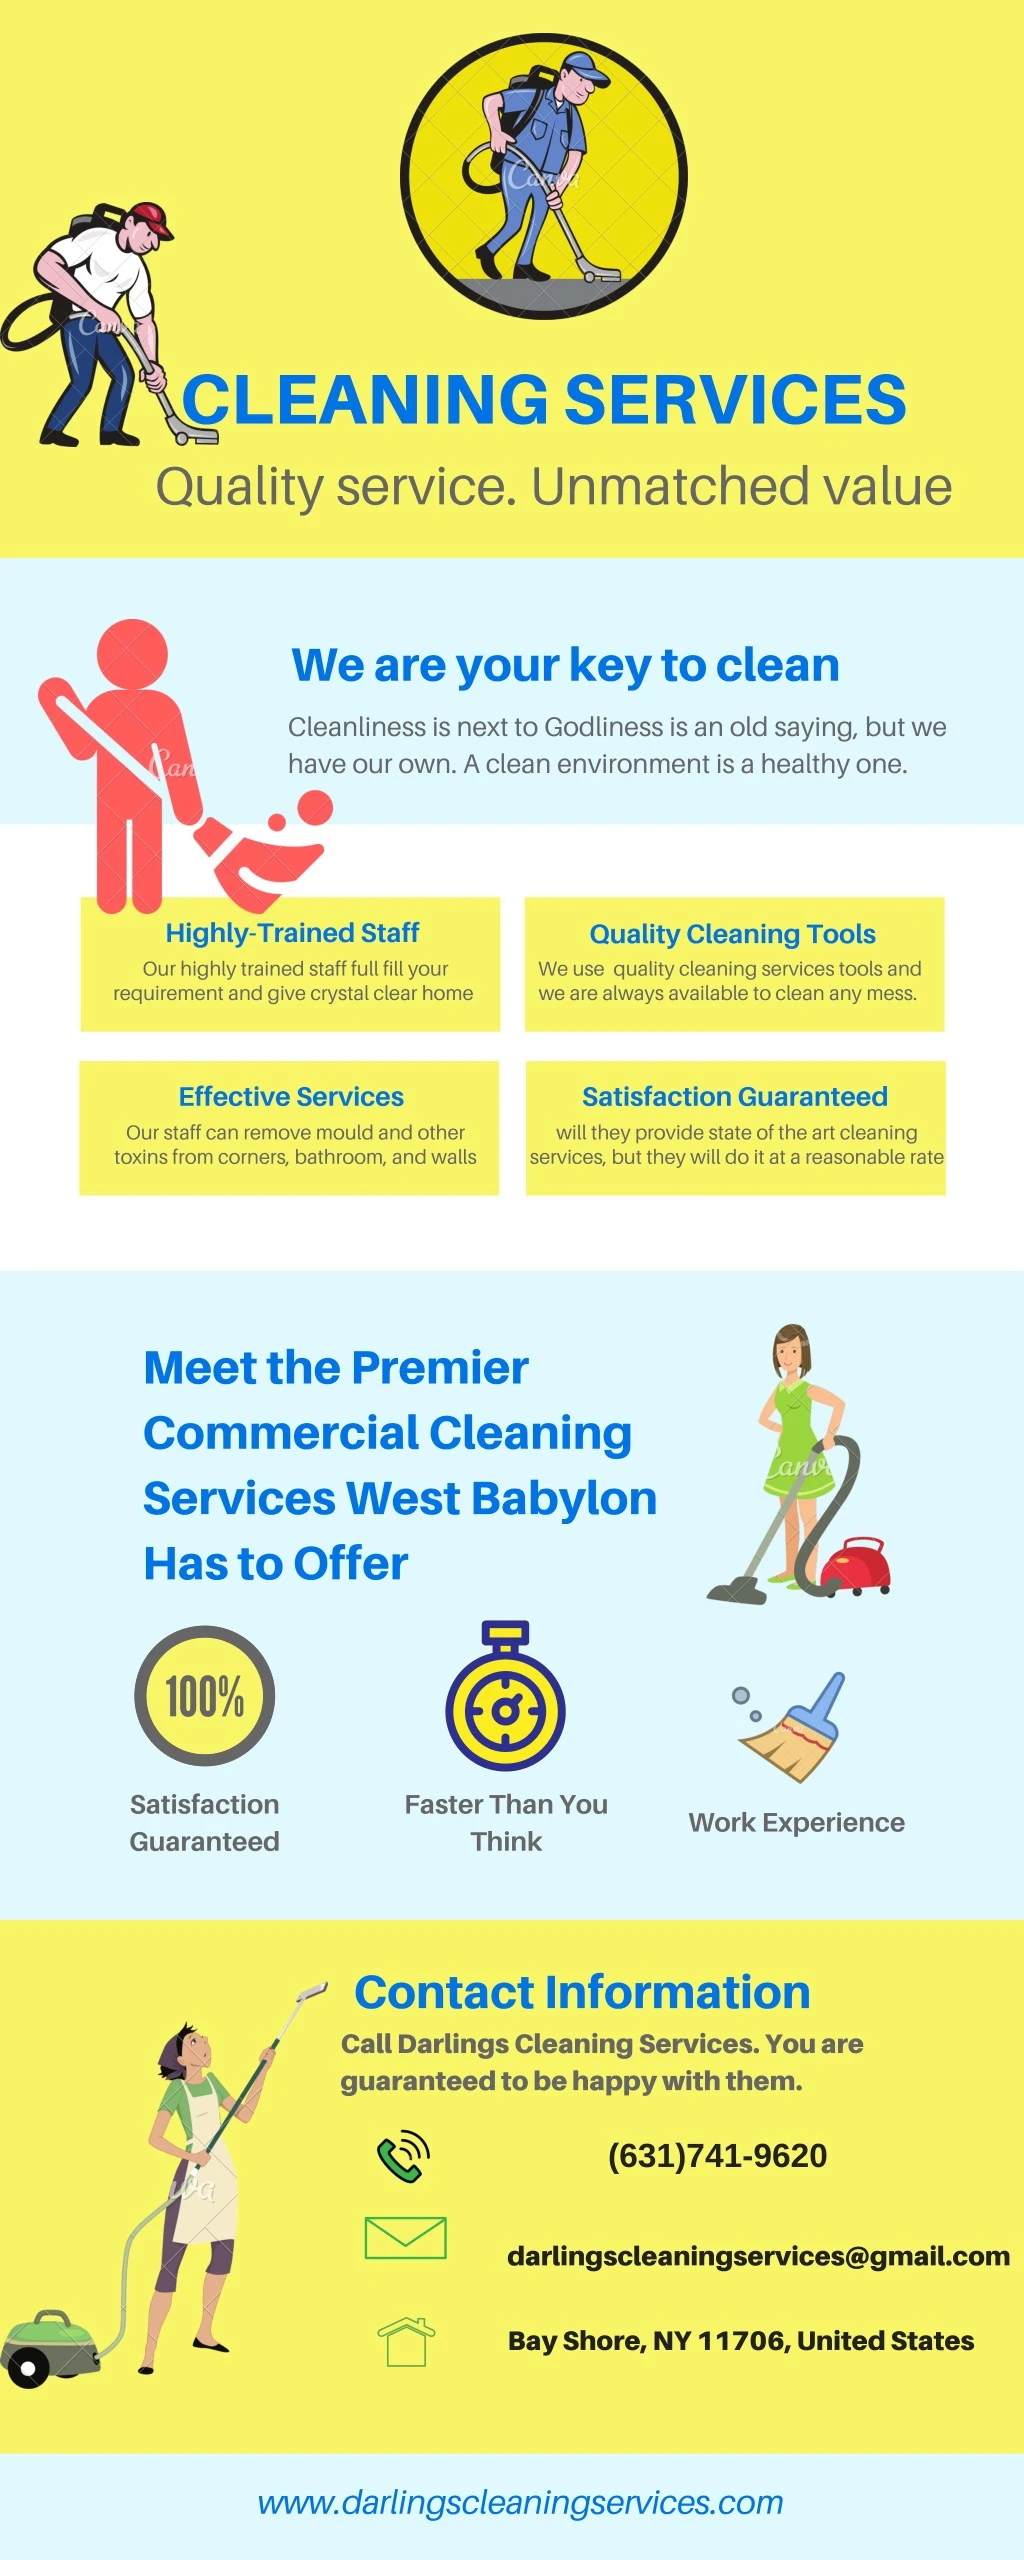 cleaning services quality service unmatched value